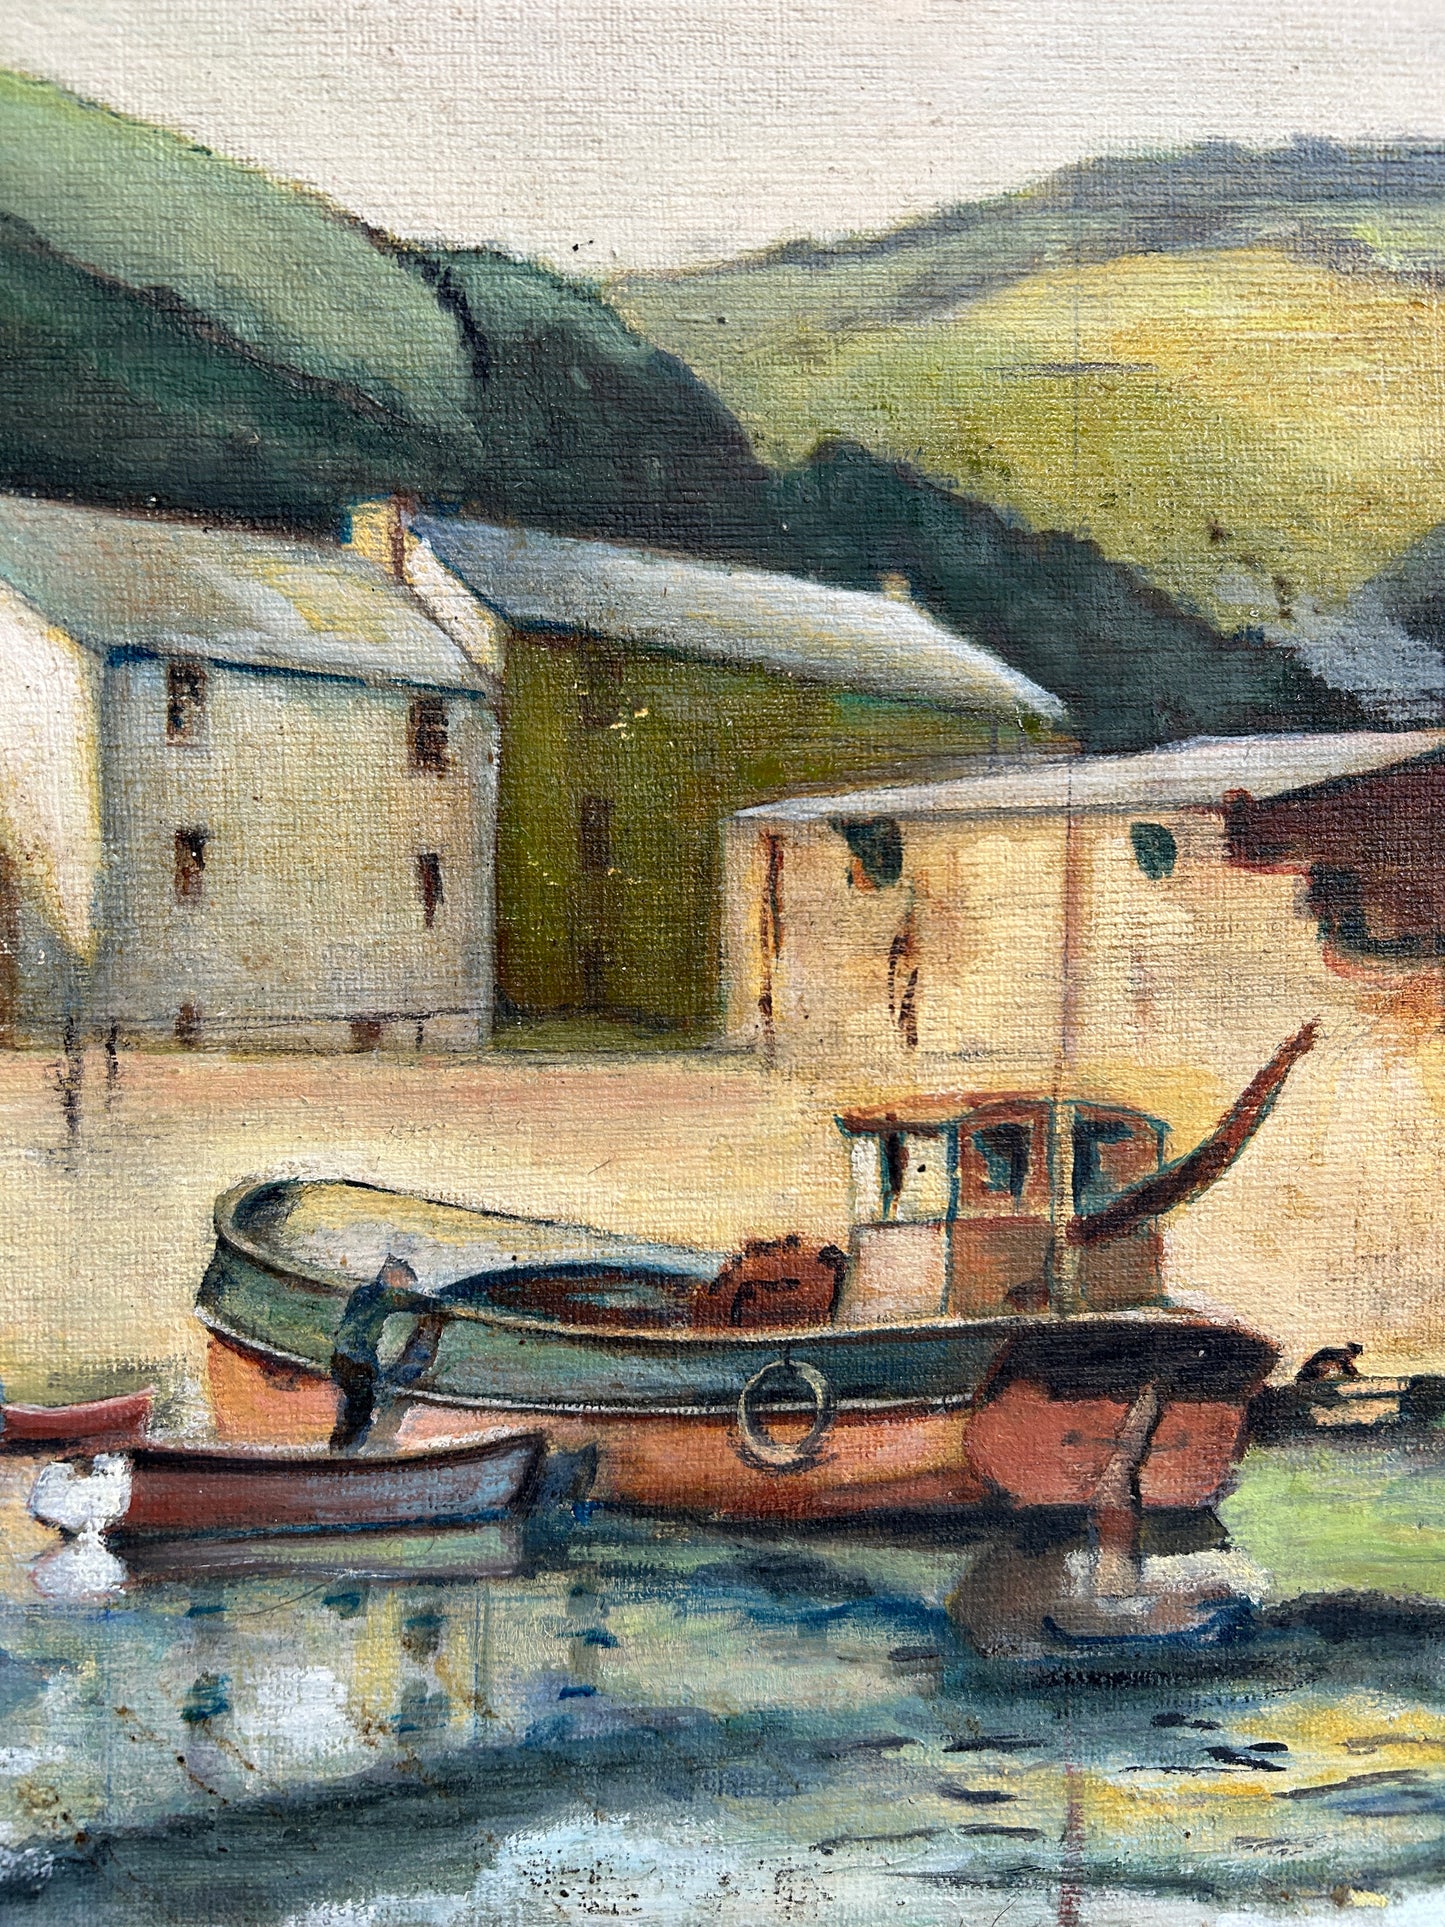 A view of Saint Isaac, Cornwall in a Mod Brit Style C.1960